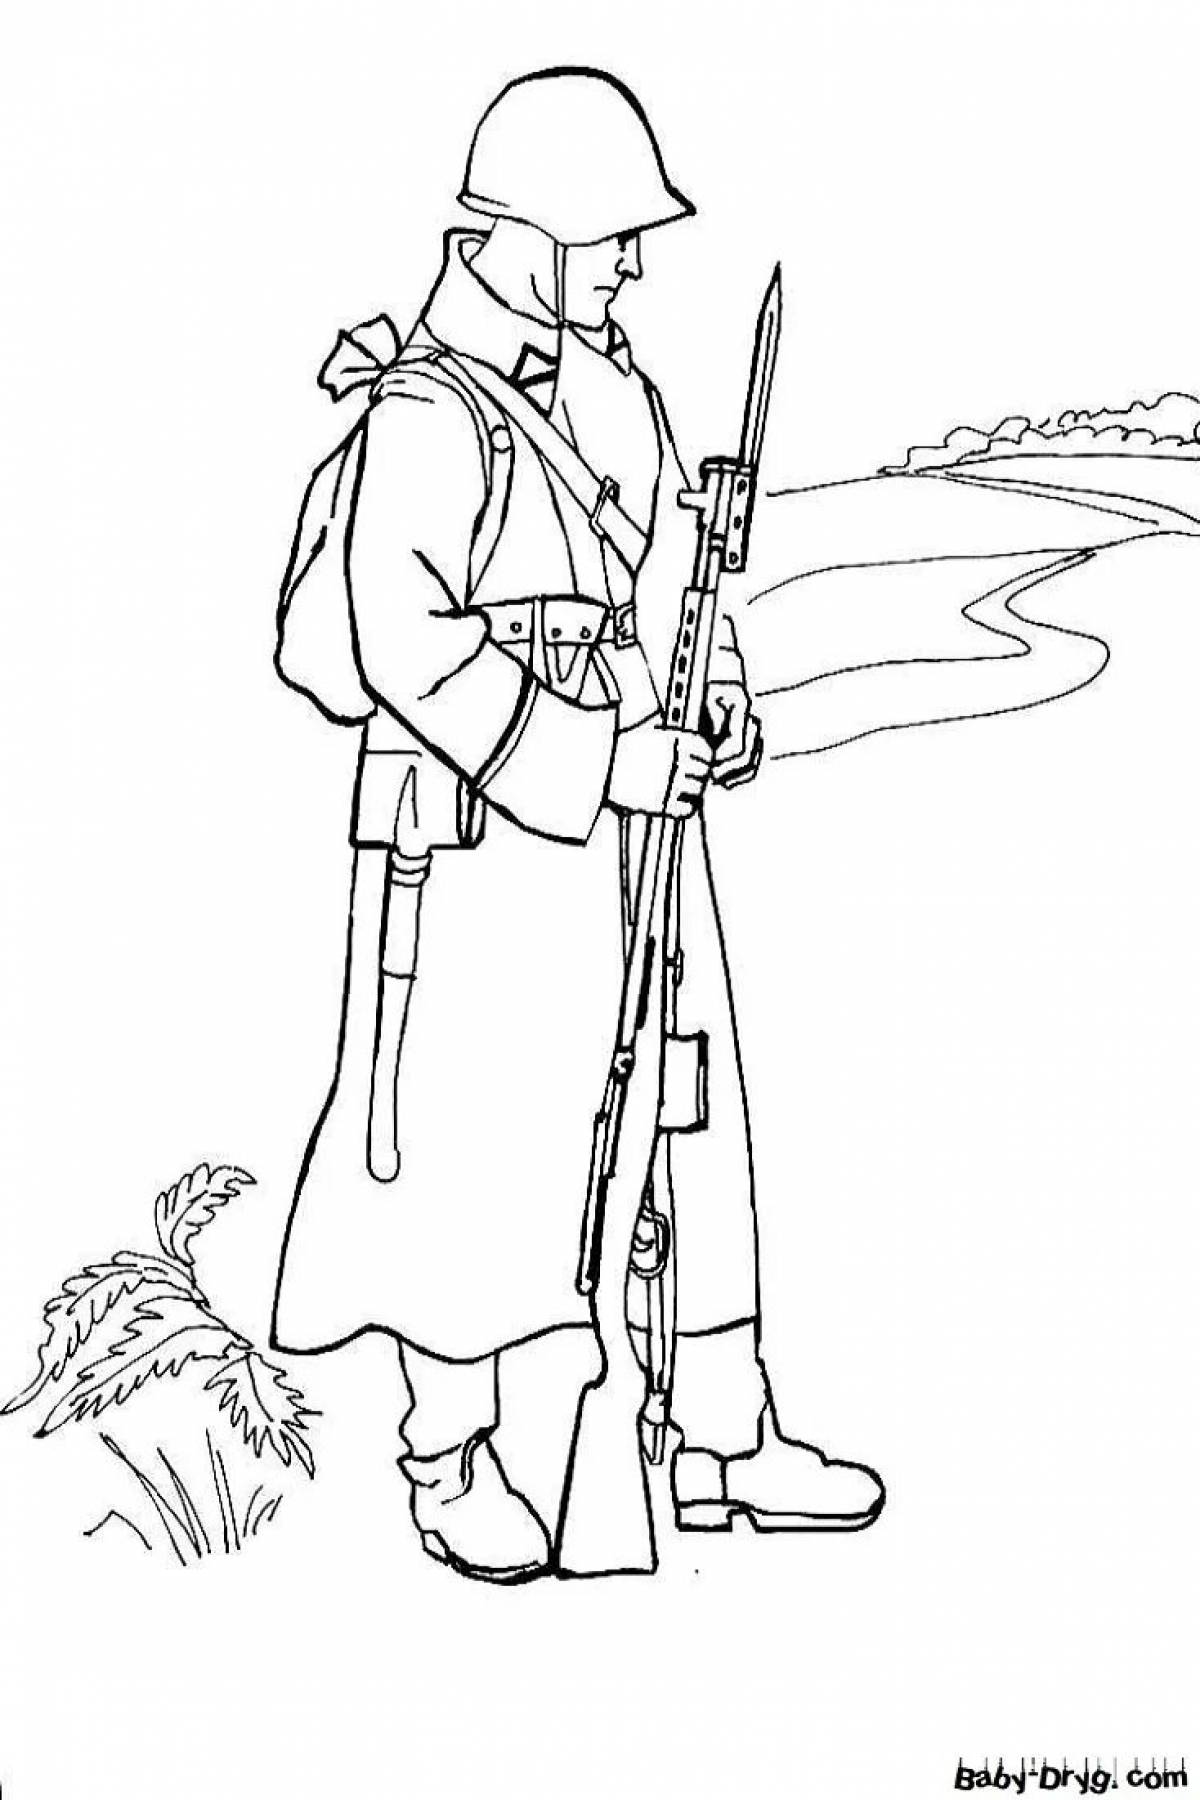 Majestic ussr soldier coloring book